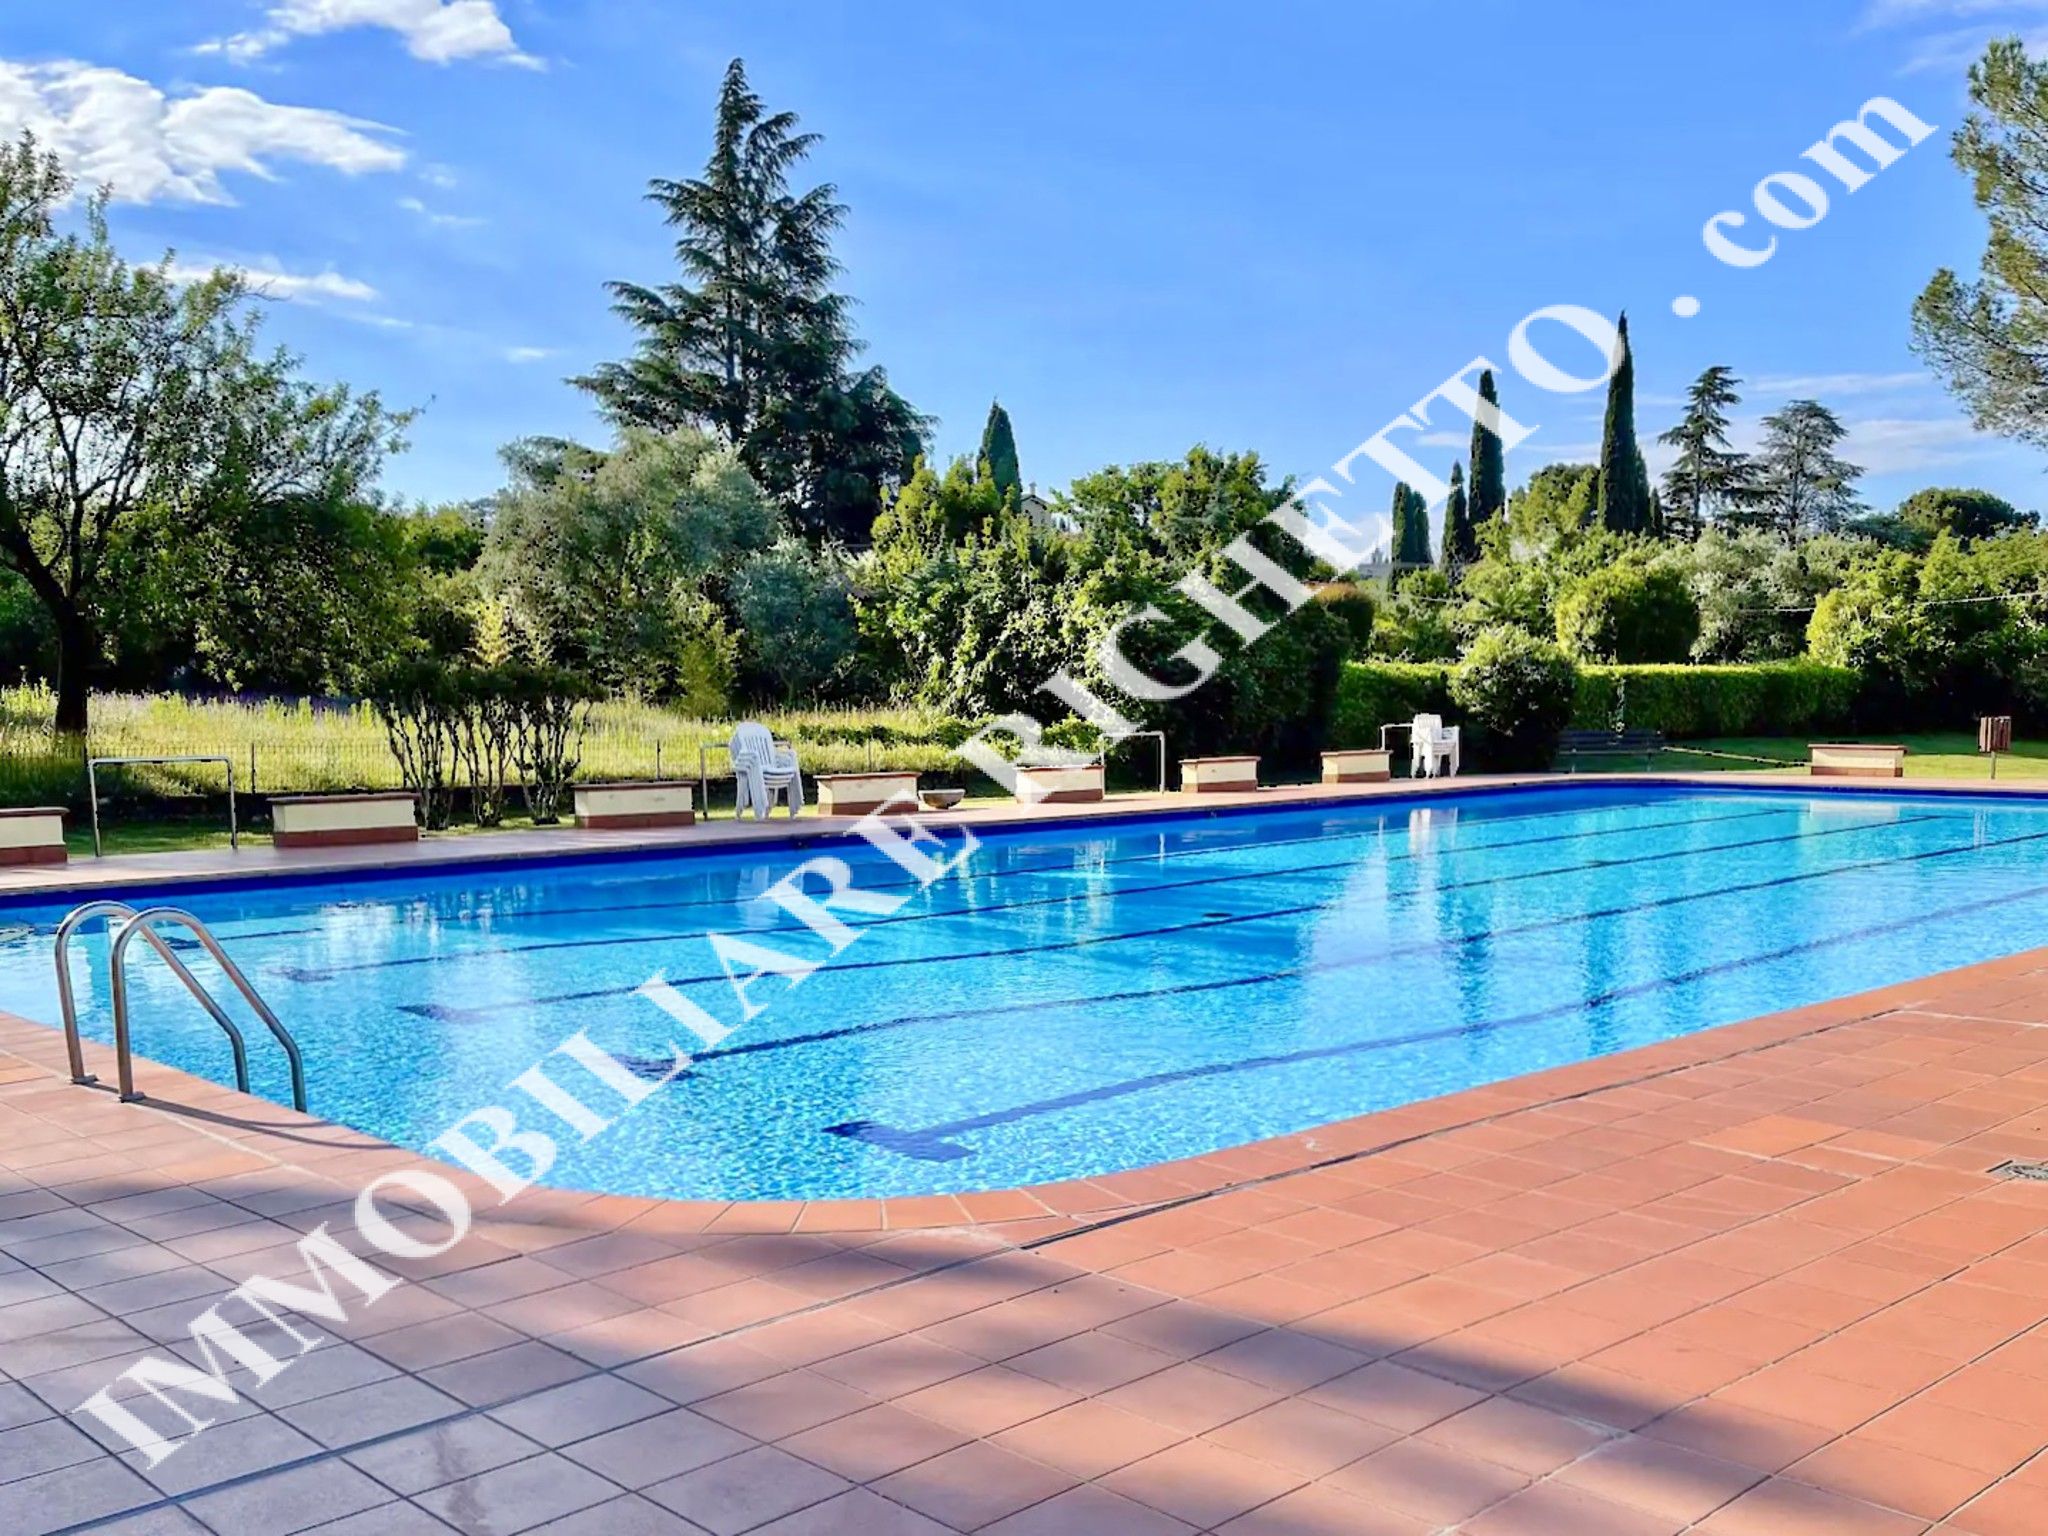 offer property for sale Attractive detached house in a beautiful village with swimming pools.